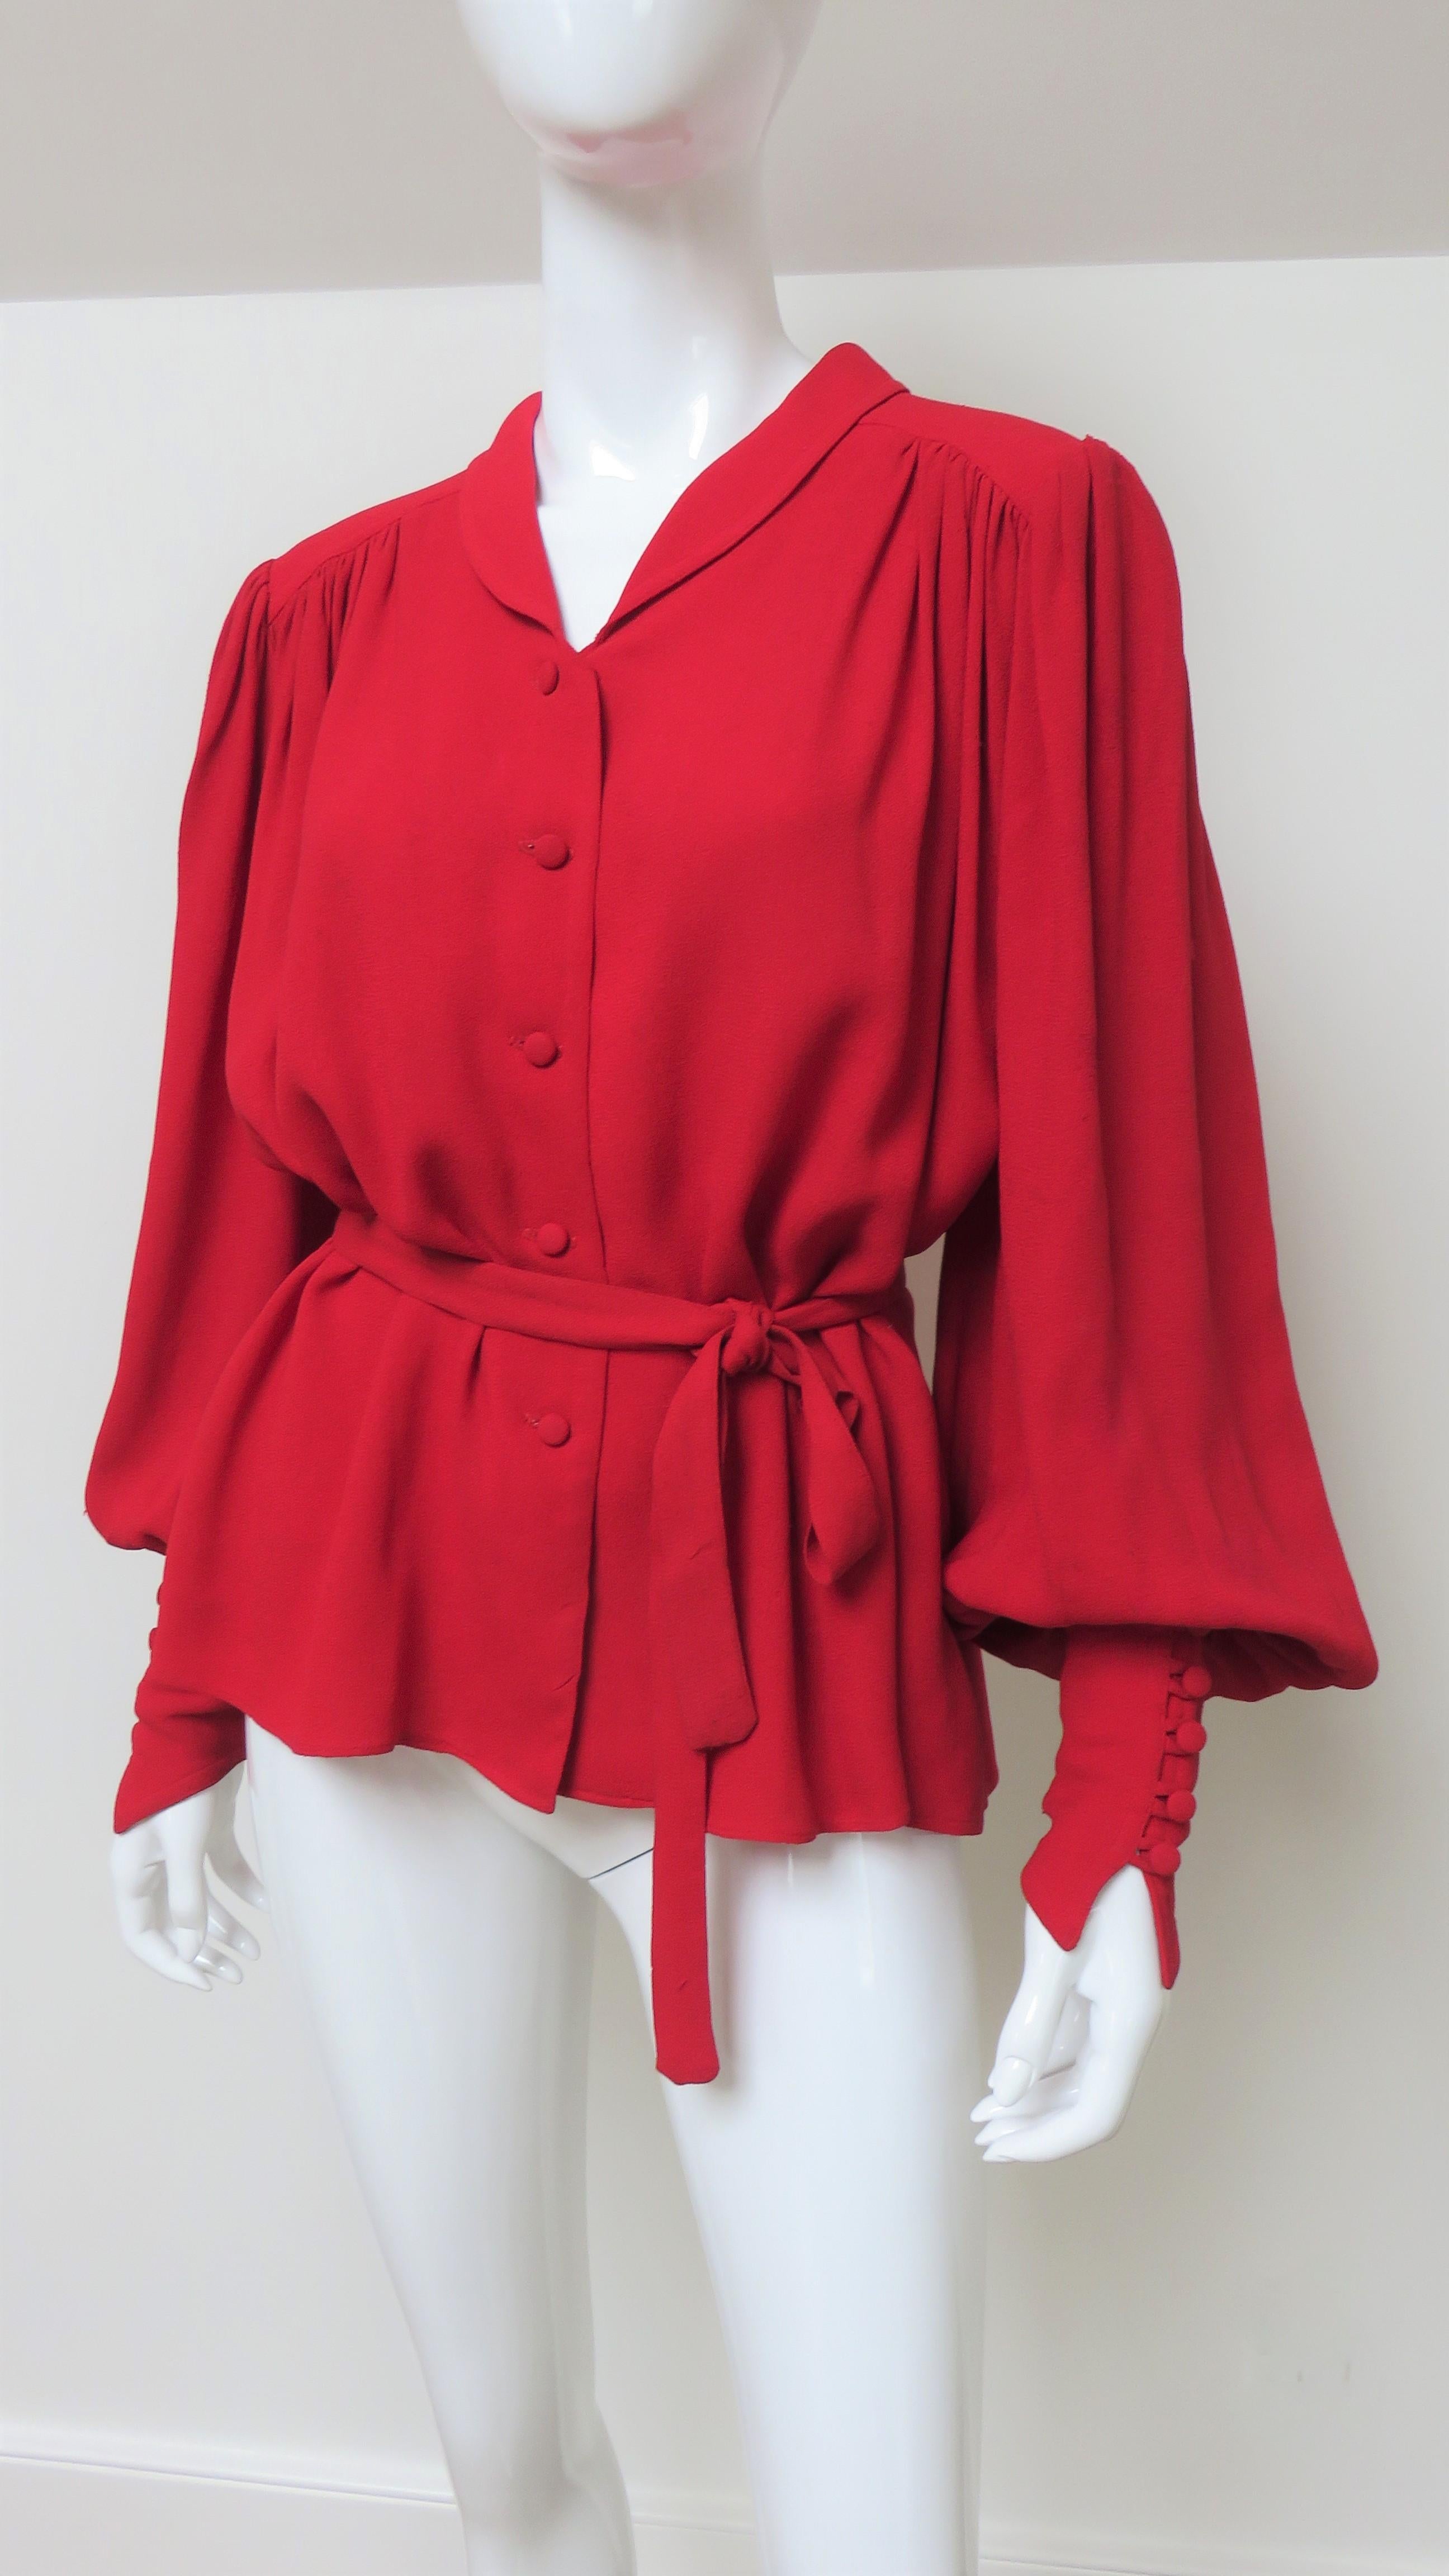 A fabulous red crepe blouse shirt from Quorum designers Ossie Clark and Alice Pollack.  It has a small rounded shirt collar, back yoke and full sleeves with wide pointed cuffs and self covered buttons and loops cuffs. The shirt body and sleeves